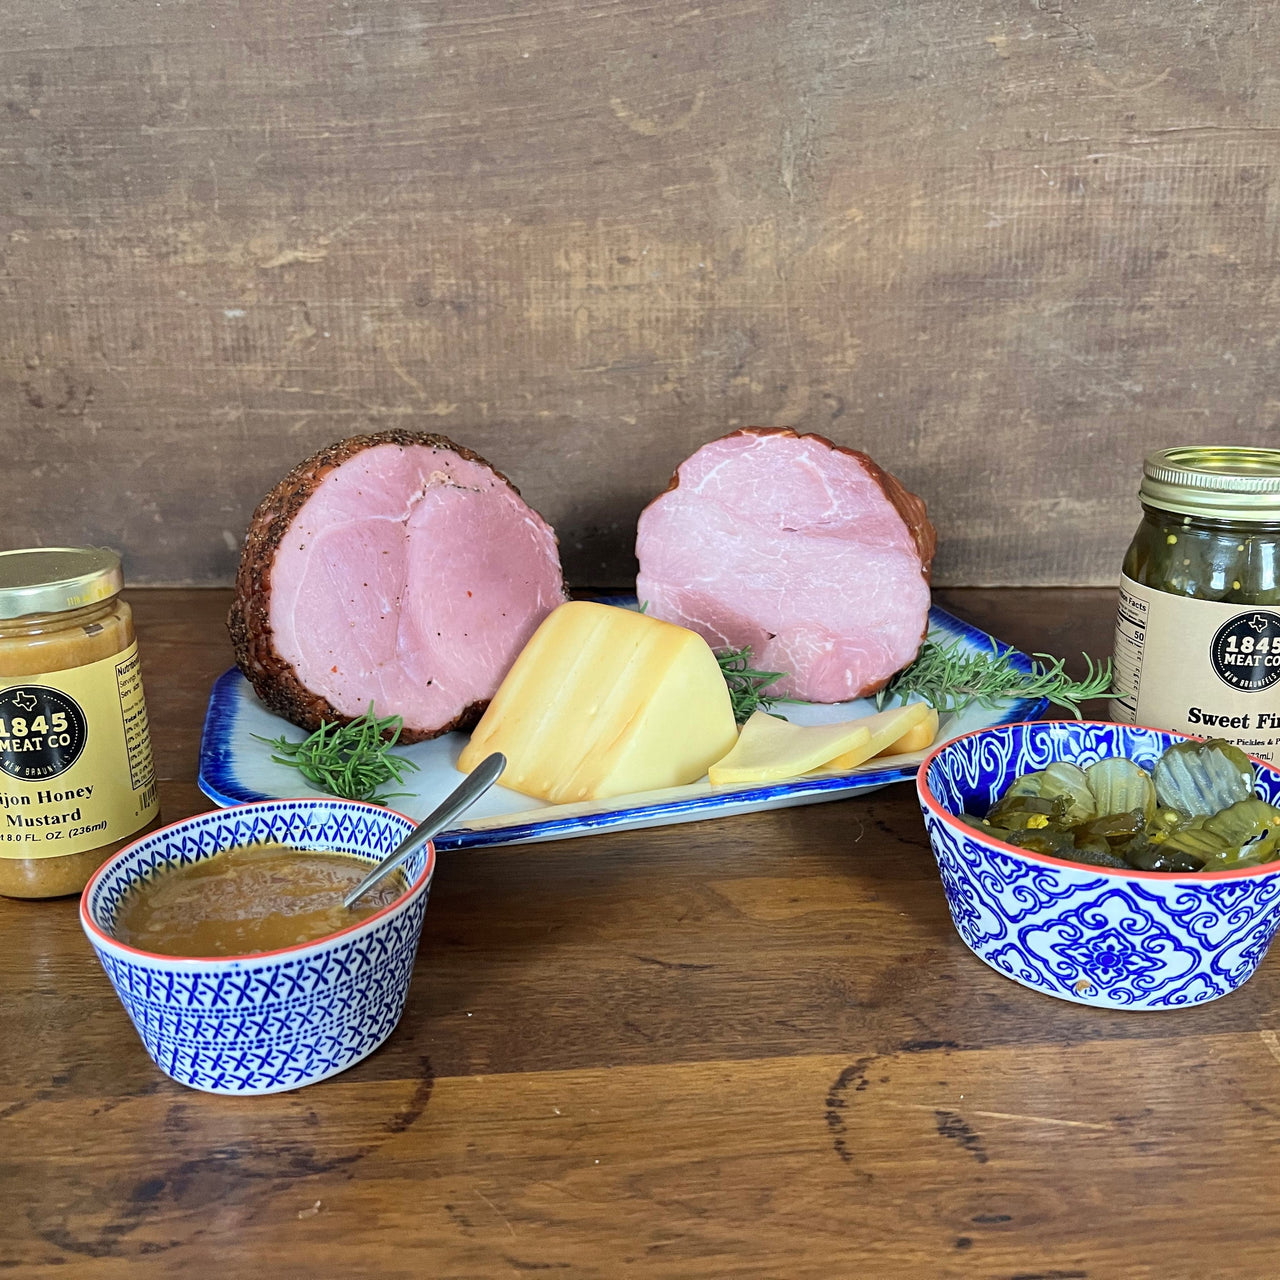 A great assortment of our Boneless Hams that will make your mouth water.  Includes:  2 - 3 lbs. Boneless Ham 2 - 3 lbs. Peppered Boneless Ham 8 oz. Smoked Baby Swiss Cheese 8 oz. Jar of Honey Dijon Mustard 16 oz. Jar of Sweet Fire Pickles ﻿Item #55E